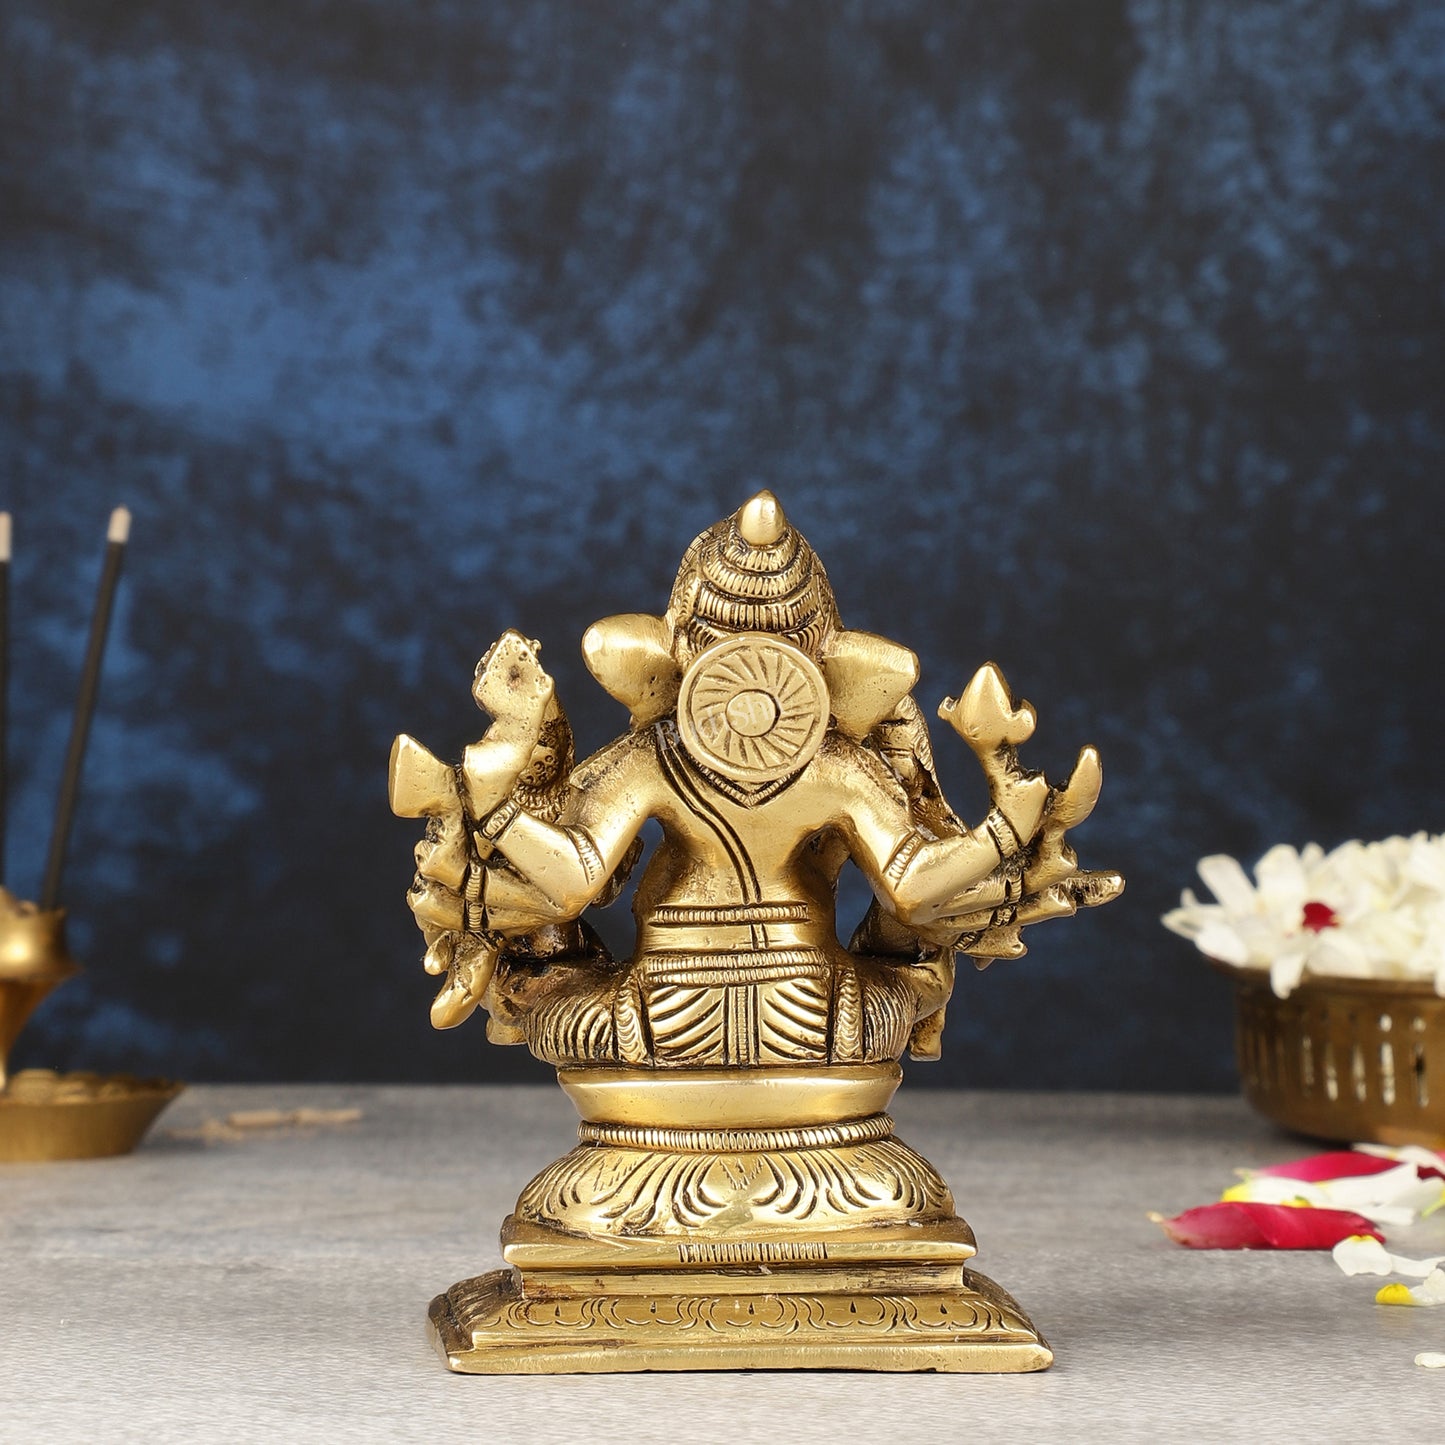 Handcrafted Brass Ganapathi with Wives Riddhi and Siddhi - 4.5 inches